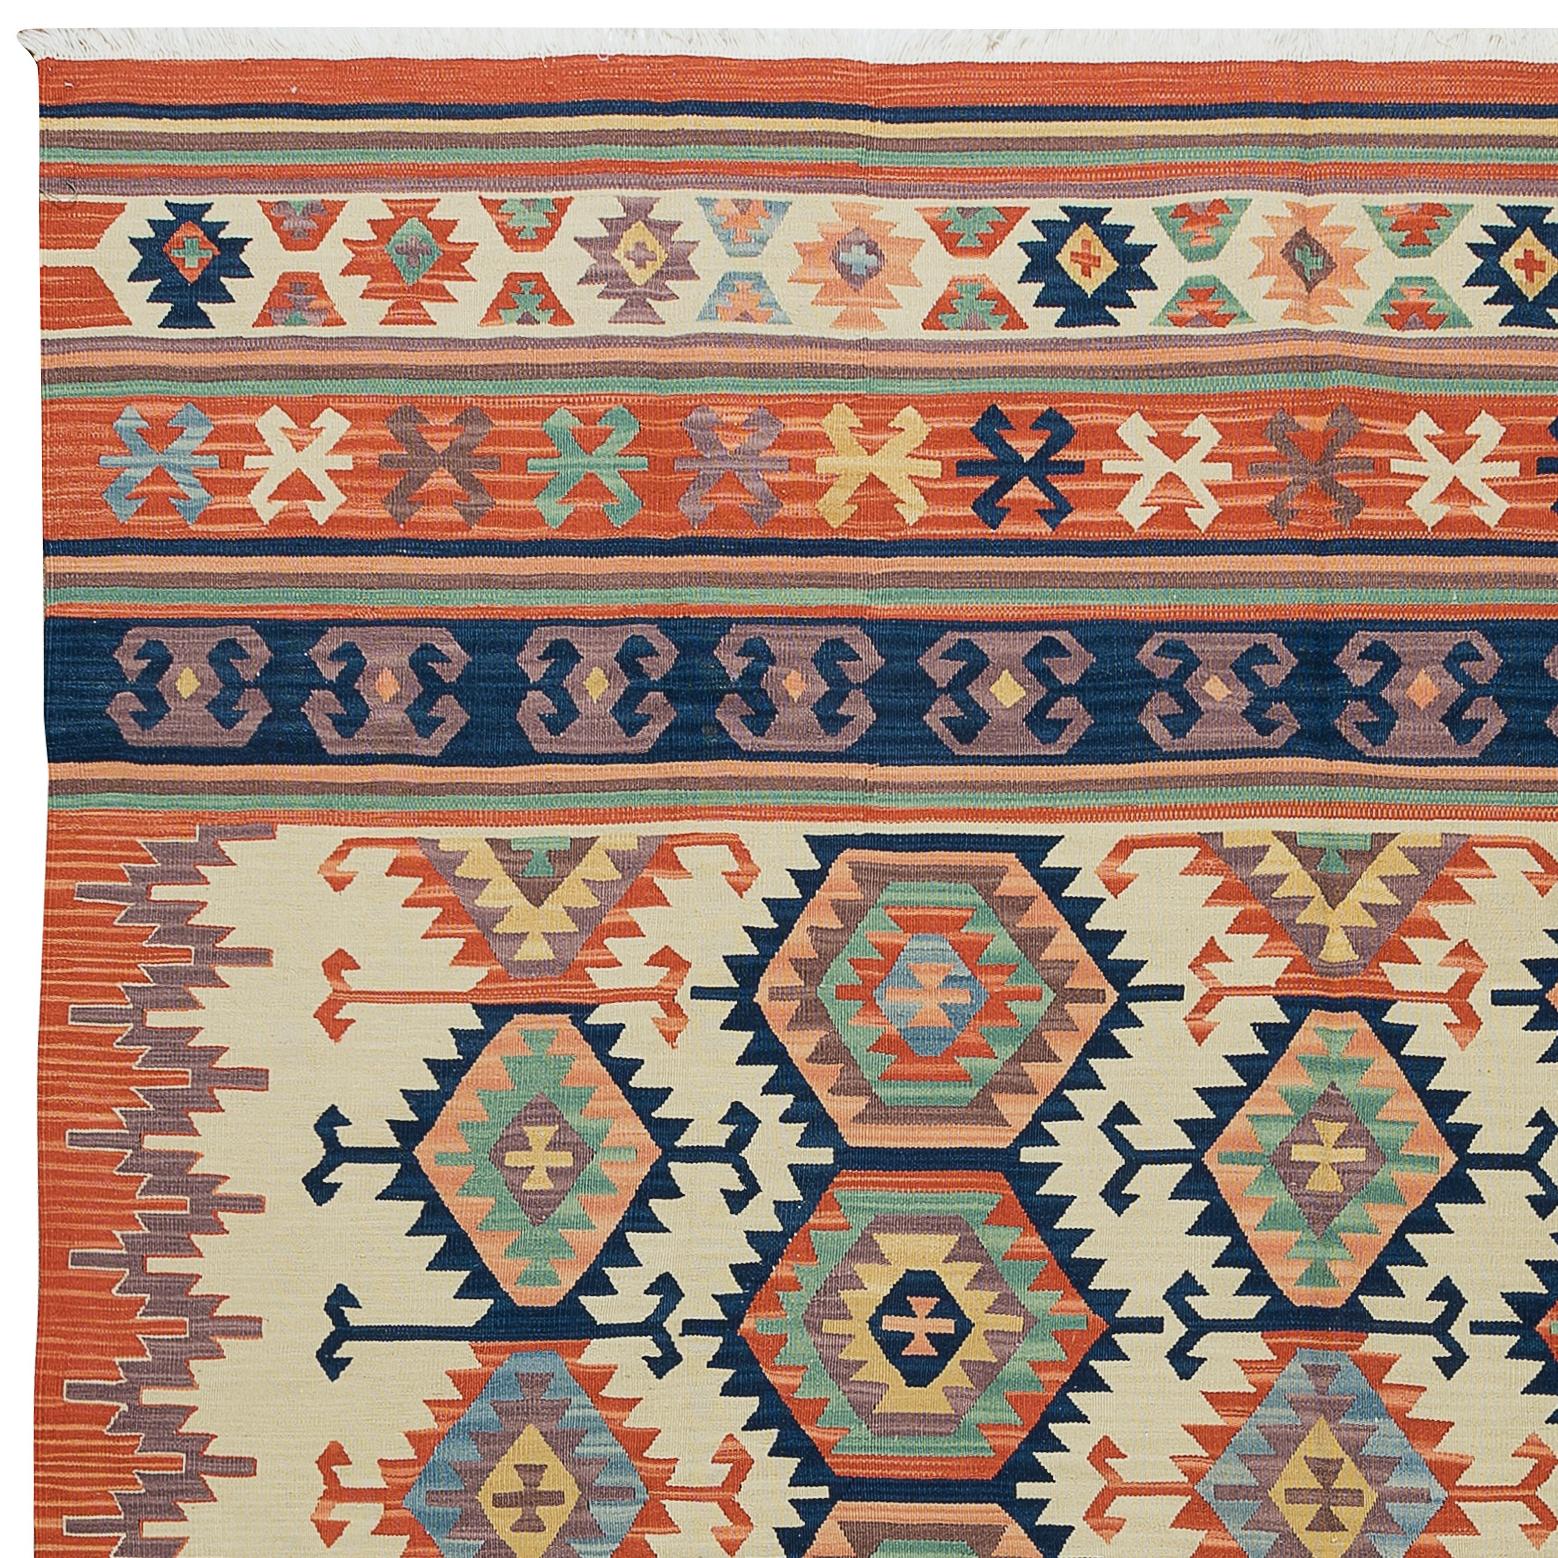 6.4x7.8 Ft One of a Kind Vintage Hand-Woven Turkish Kilim 'Flat-Weave', All Wool For Sale 2